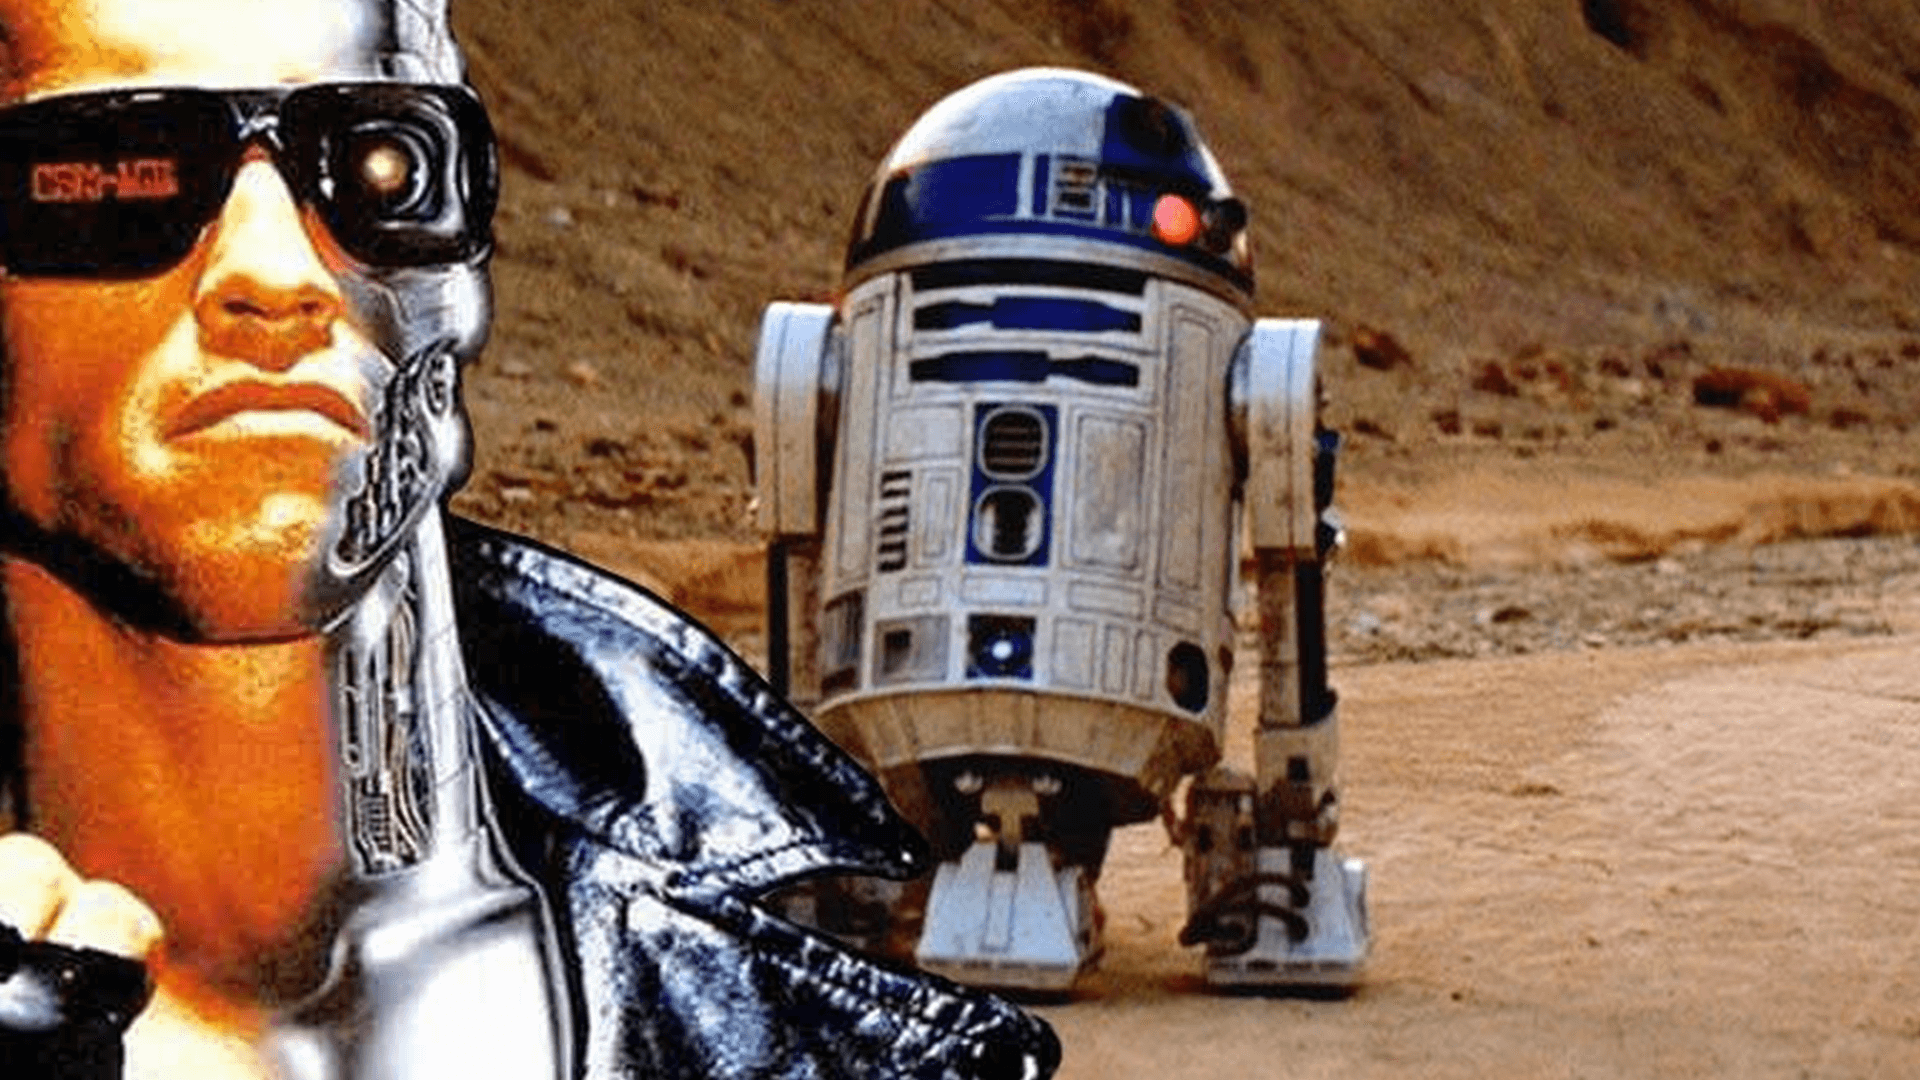 T-800 from Terminator and R2-D2 from Star Wars